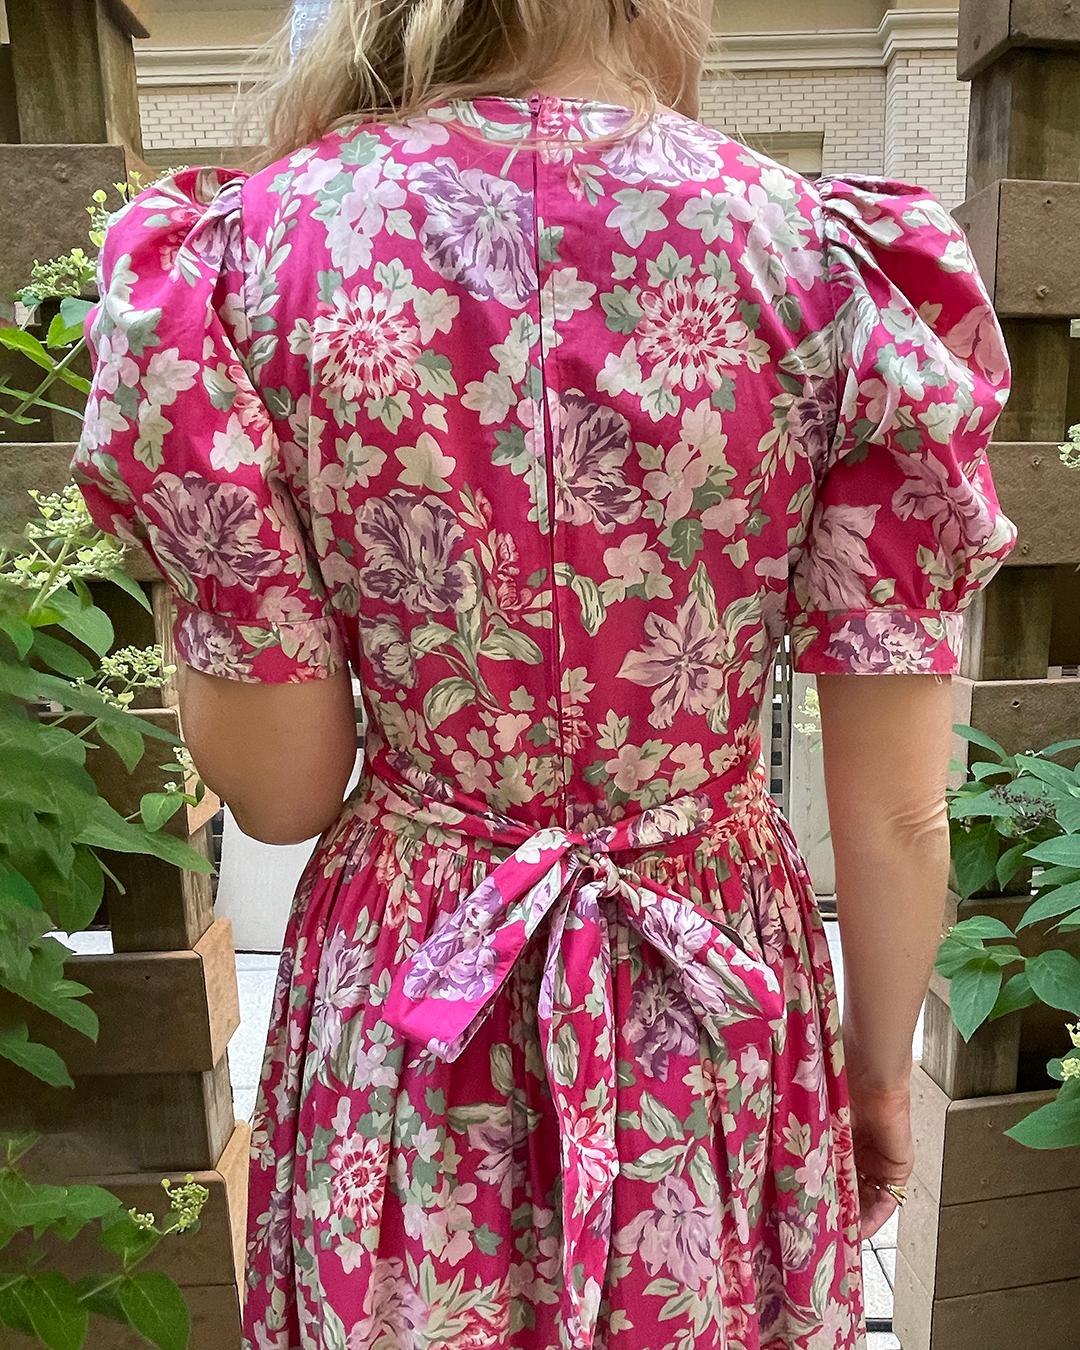 Laura Ashley Floral Dress, 1980s In Good Condition For Sale In New York, NY